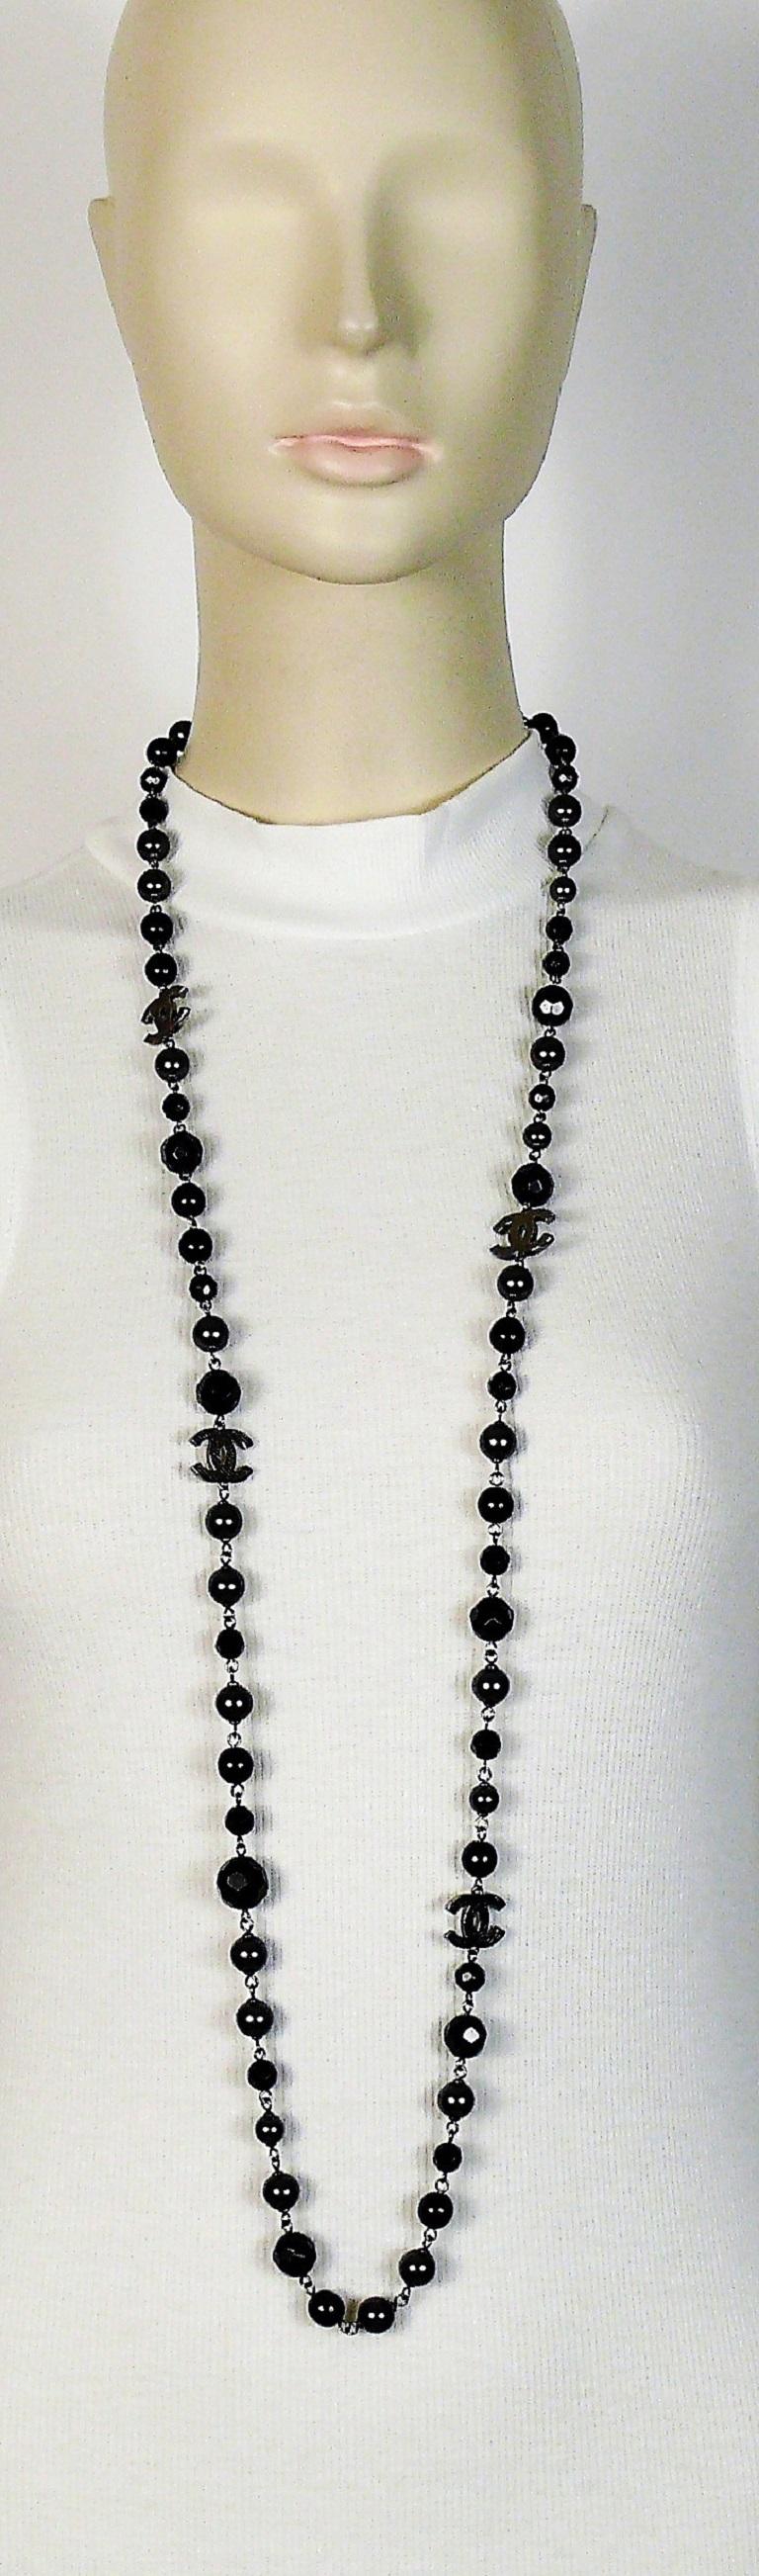 Chanel CC & pearls long necklace - 2010s second hand vintage – Lysis